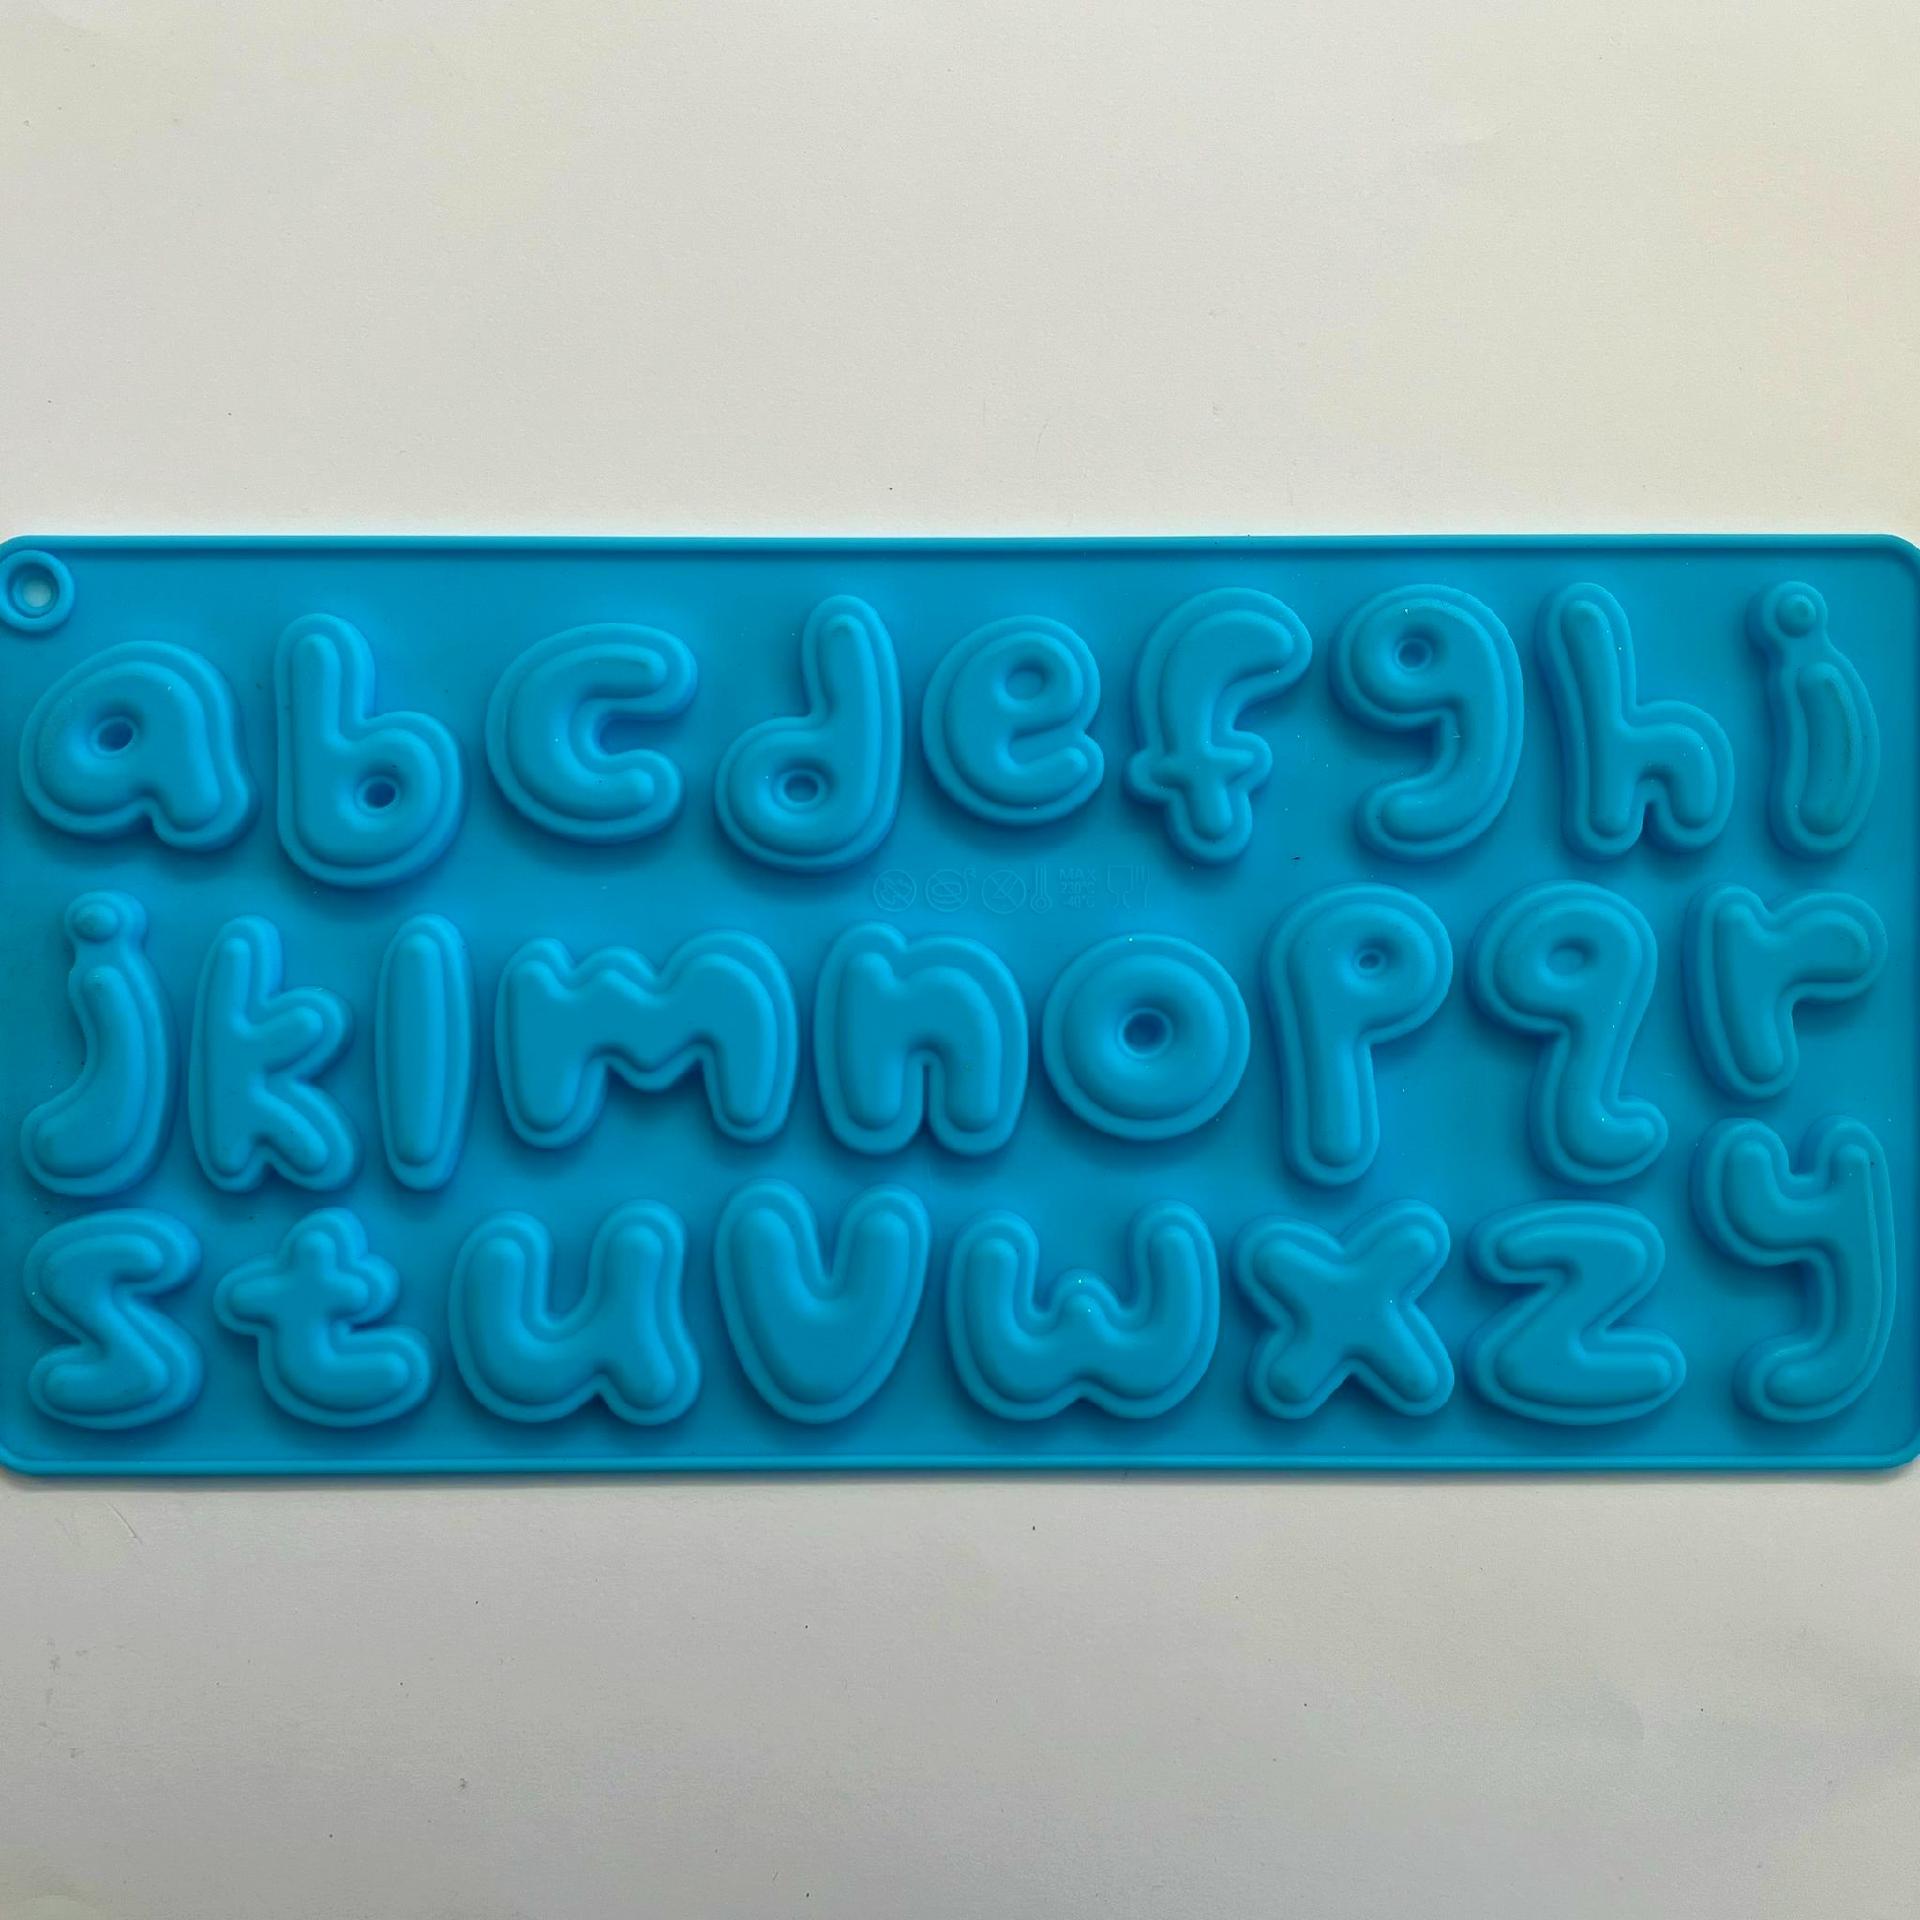 Stampo in silicone - Lettere Hobby Fun 3,5 x 3,5 cm - Bagheria